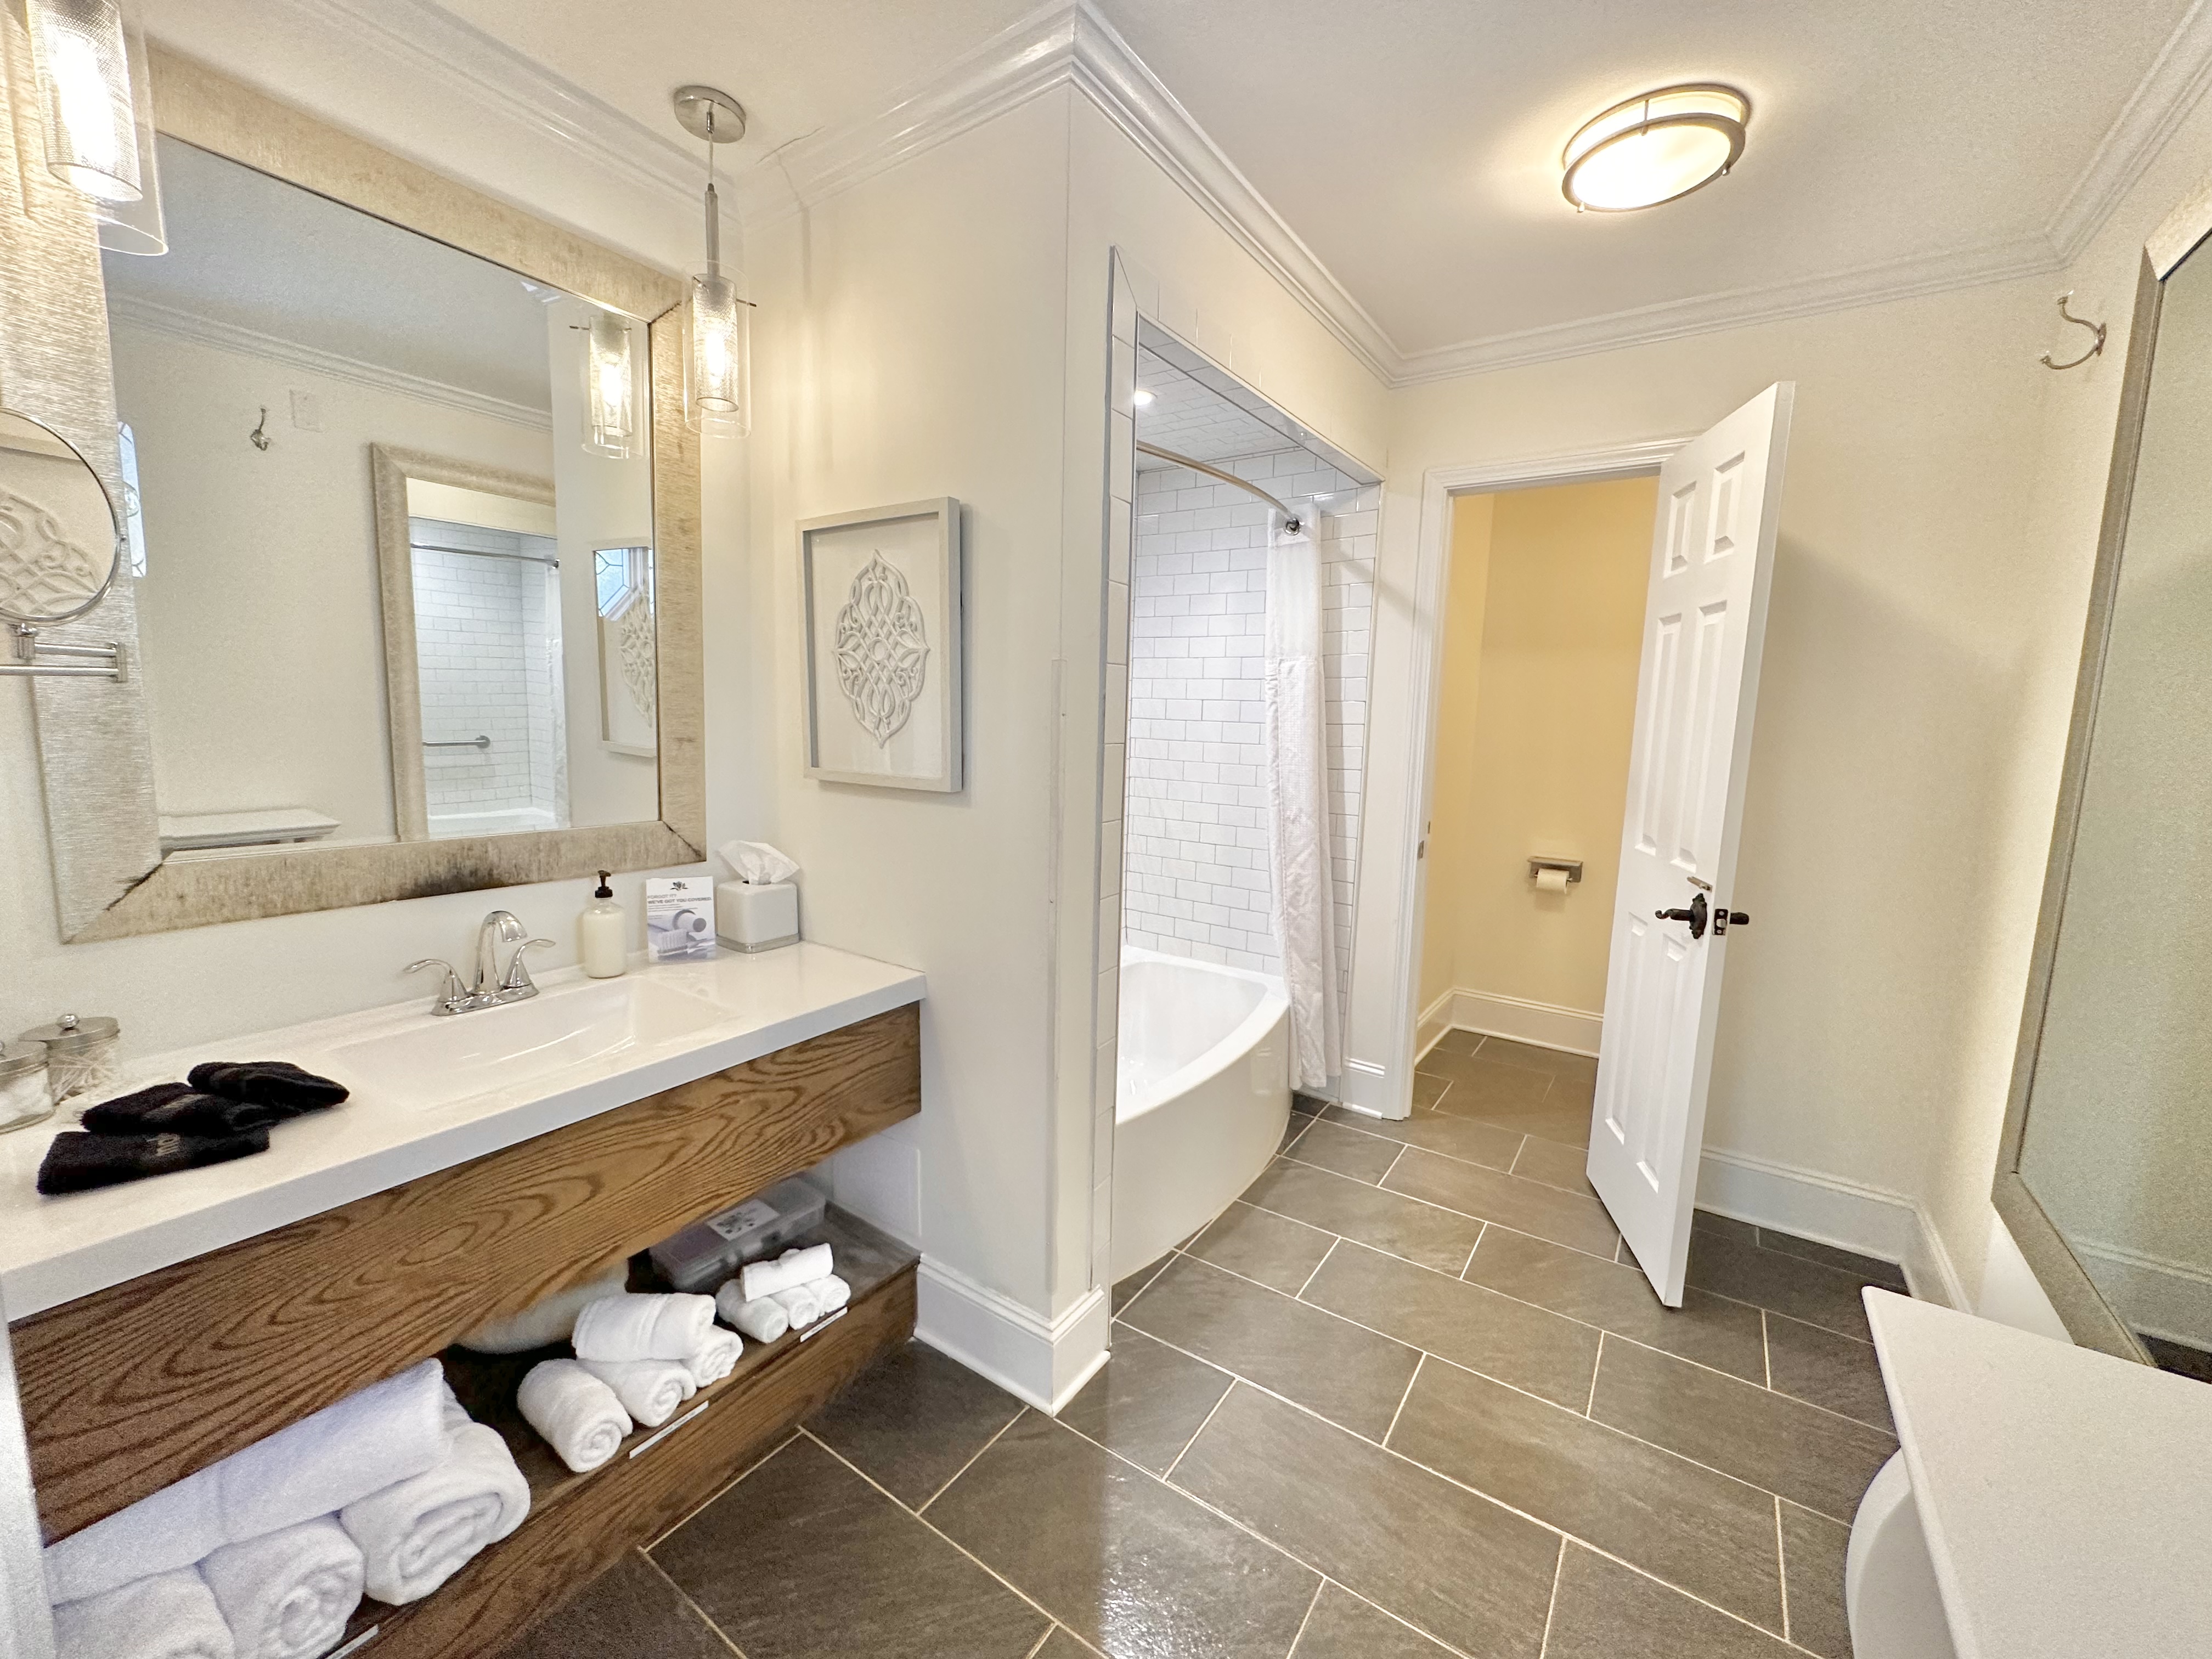 Gardenia Suite en Suite Bathroom - Upper Level. Only tub in the main house!